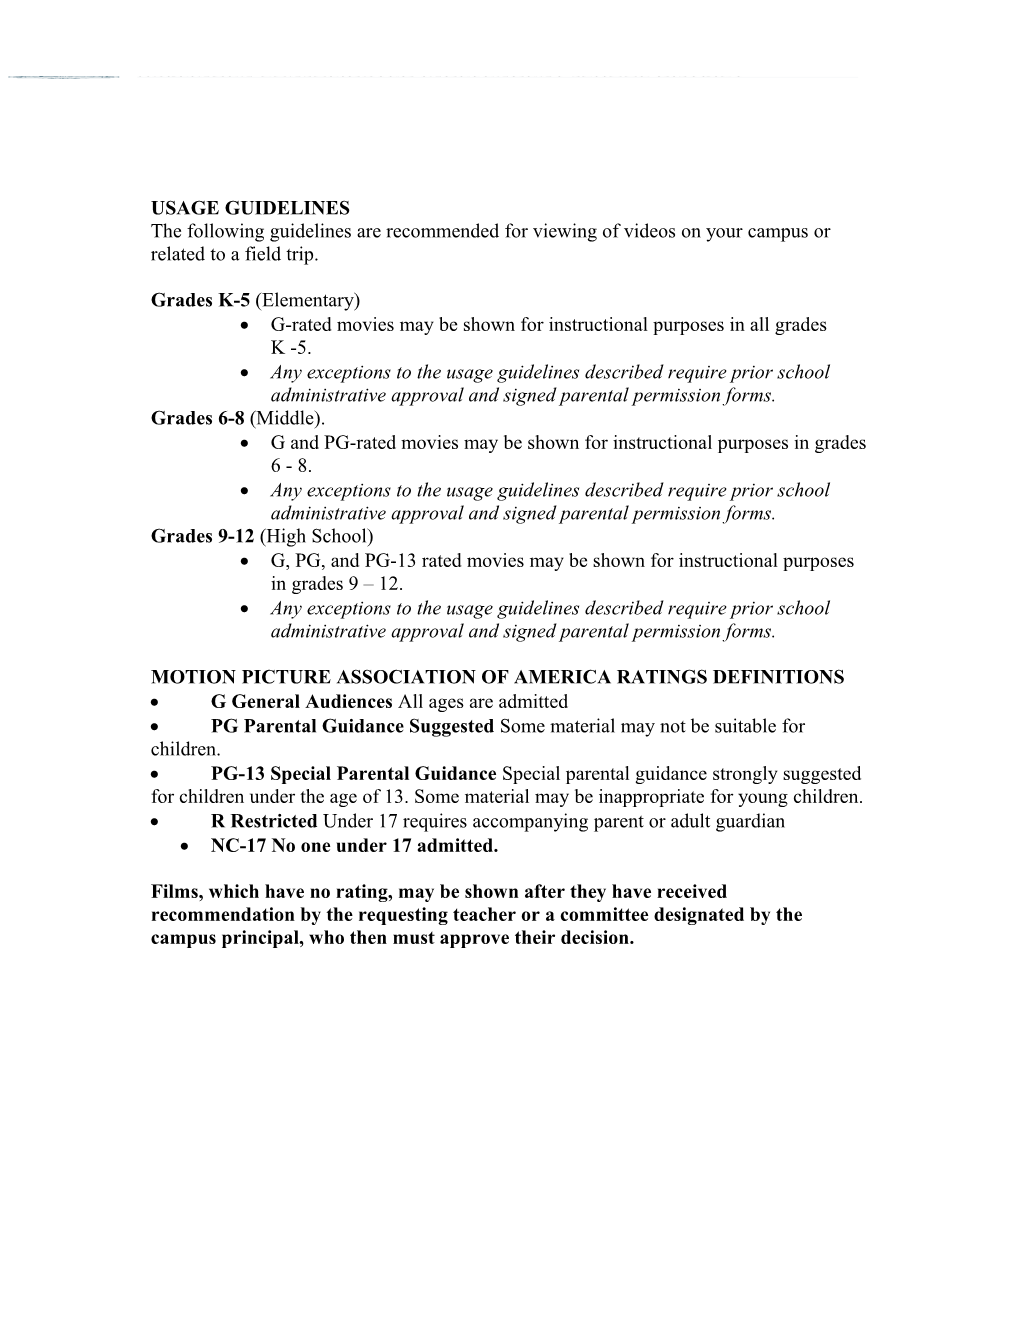 Administrative Guidelines for Electronic Media Use s1